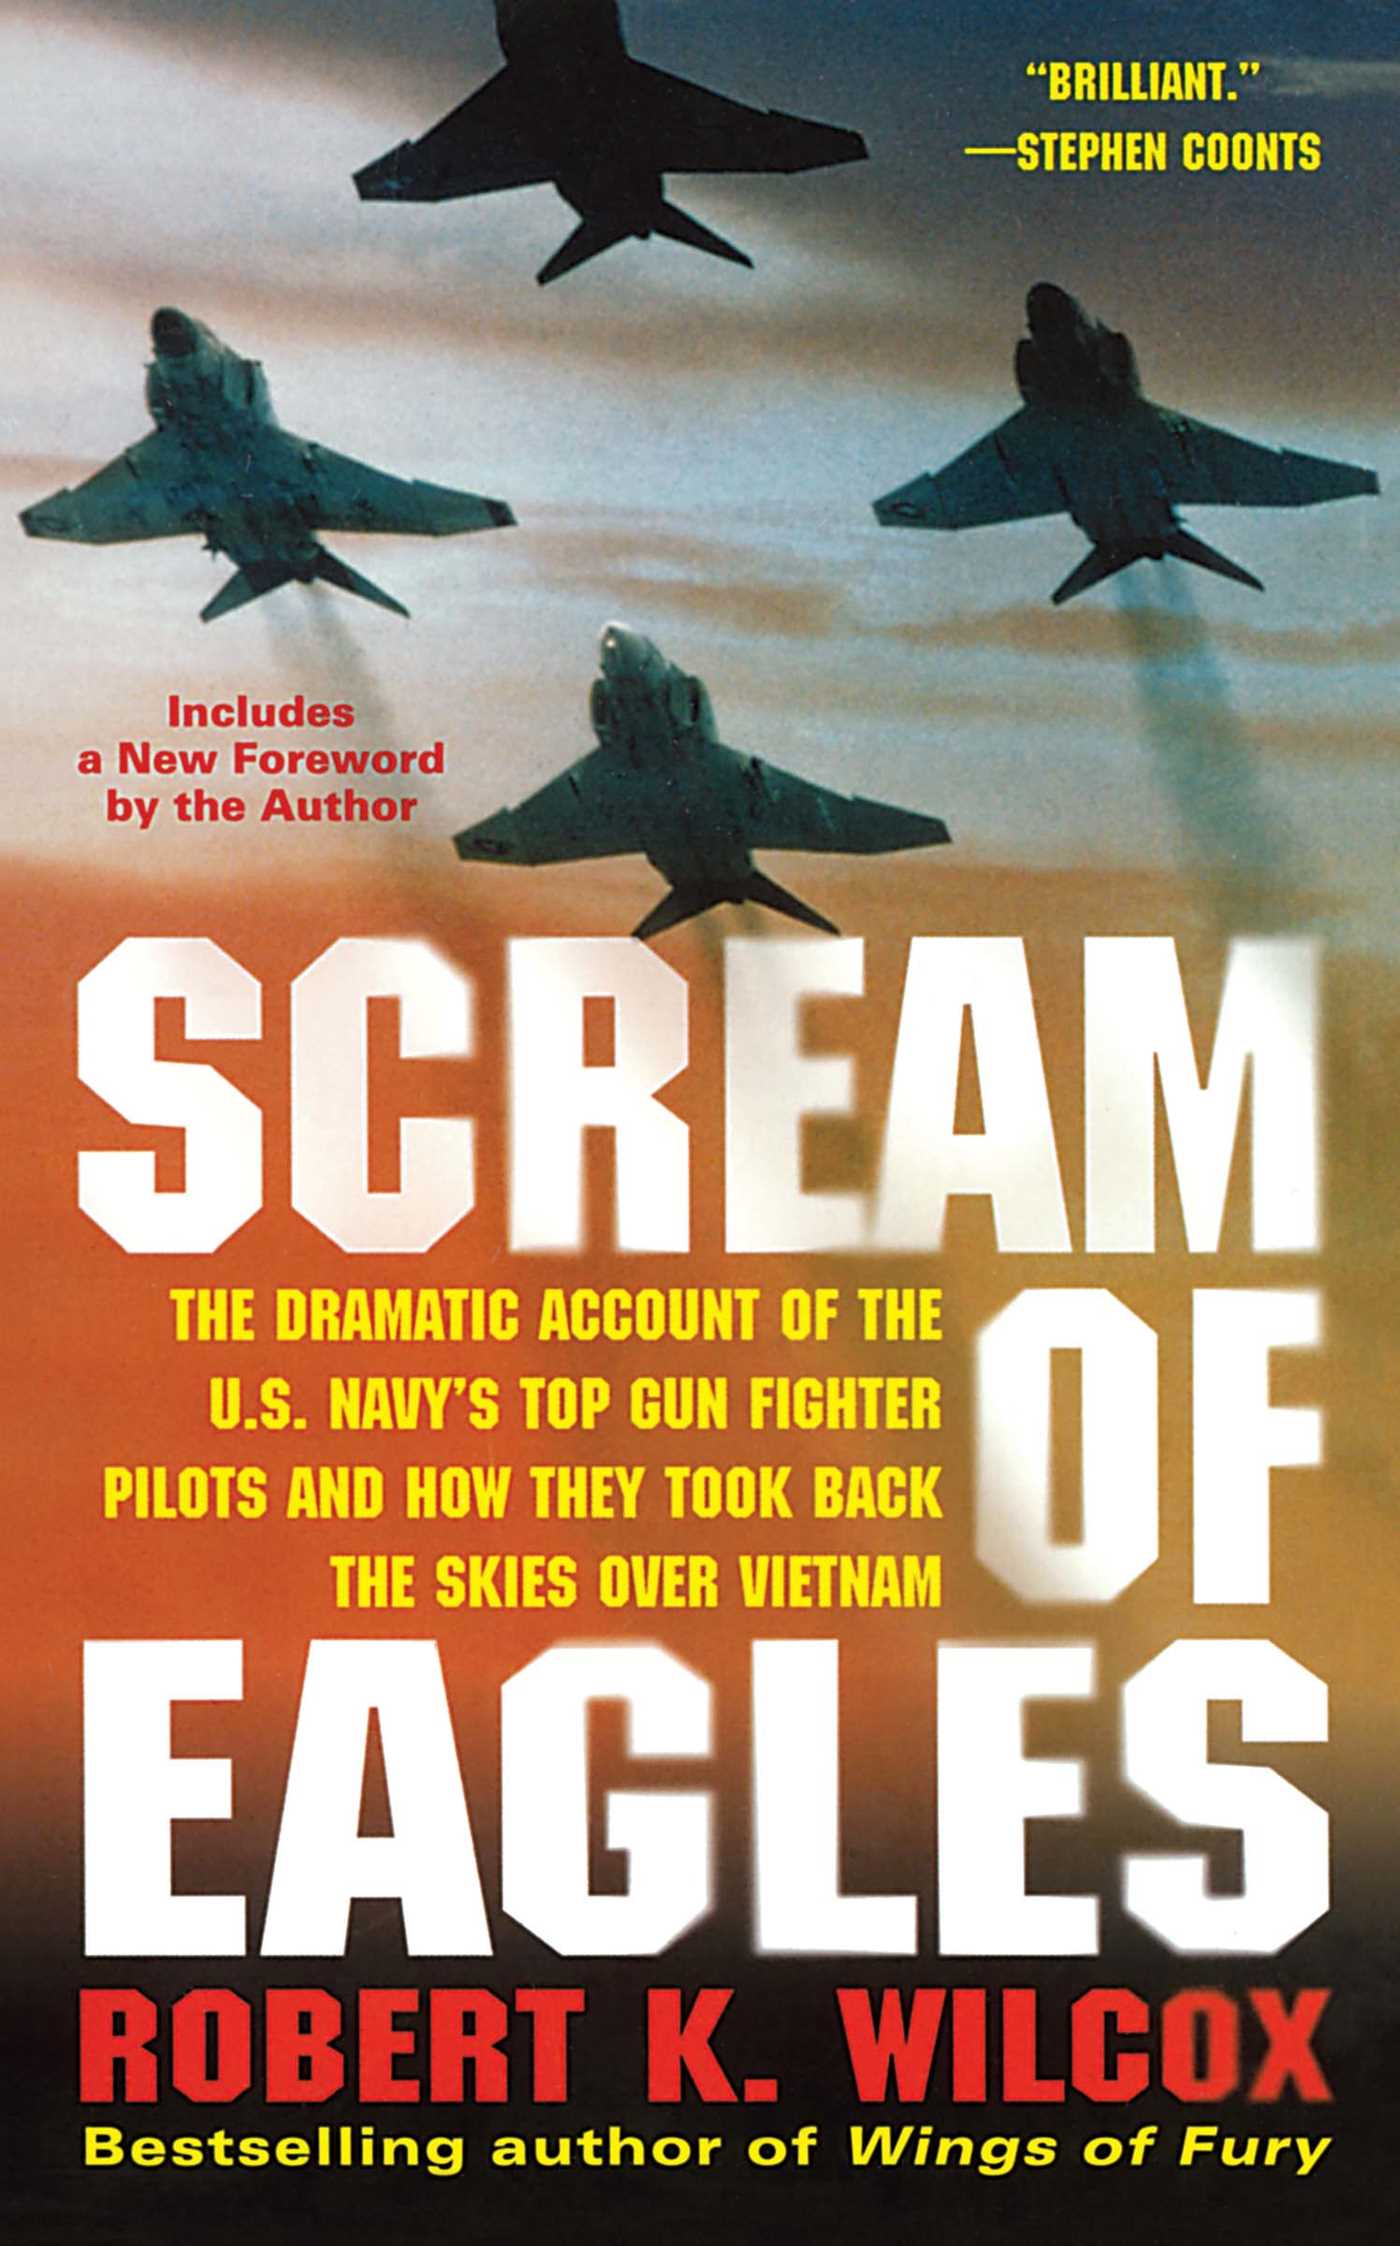 Scream of Eagles: The Dramatic Account of the U.S. Navy's Top Gun Fighter Pilots